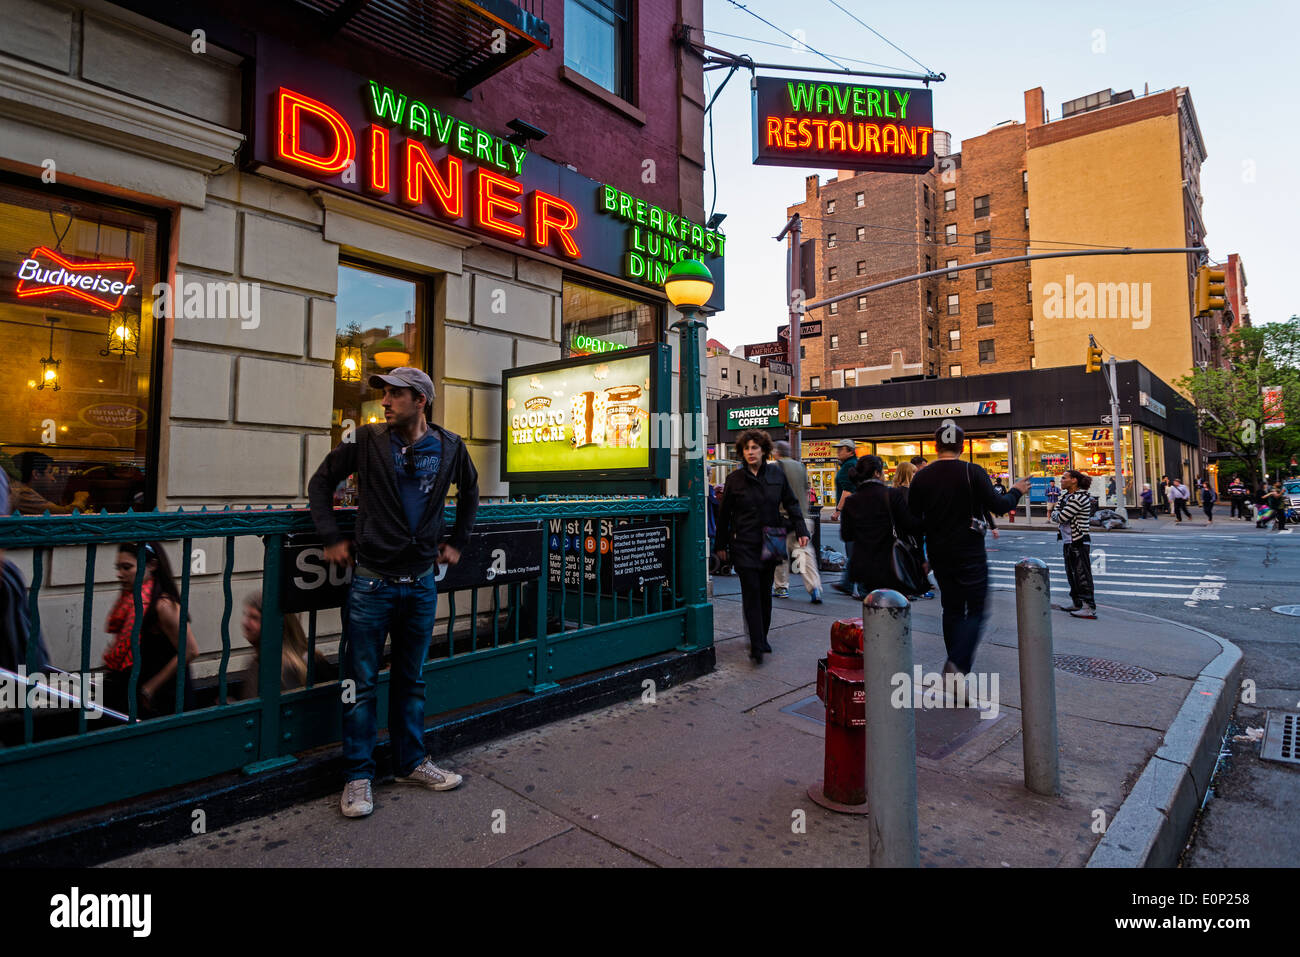 New York, NY - 17 May 2014 Subway entrance outside the Waverly Diner in Greenwich Village ©Stacy Walsh Rosenstock/Alamy Stock Photo